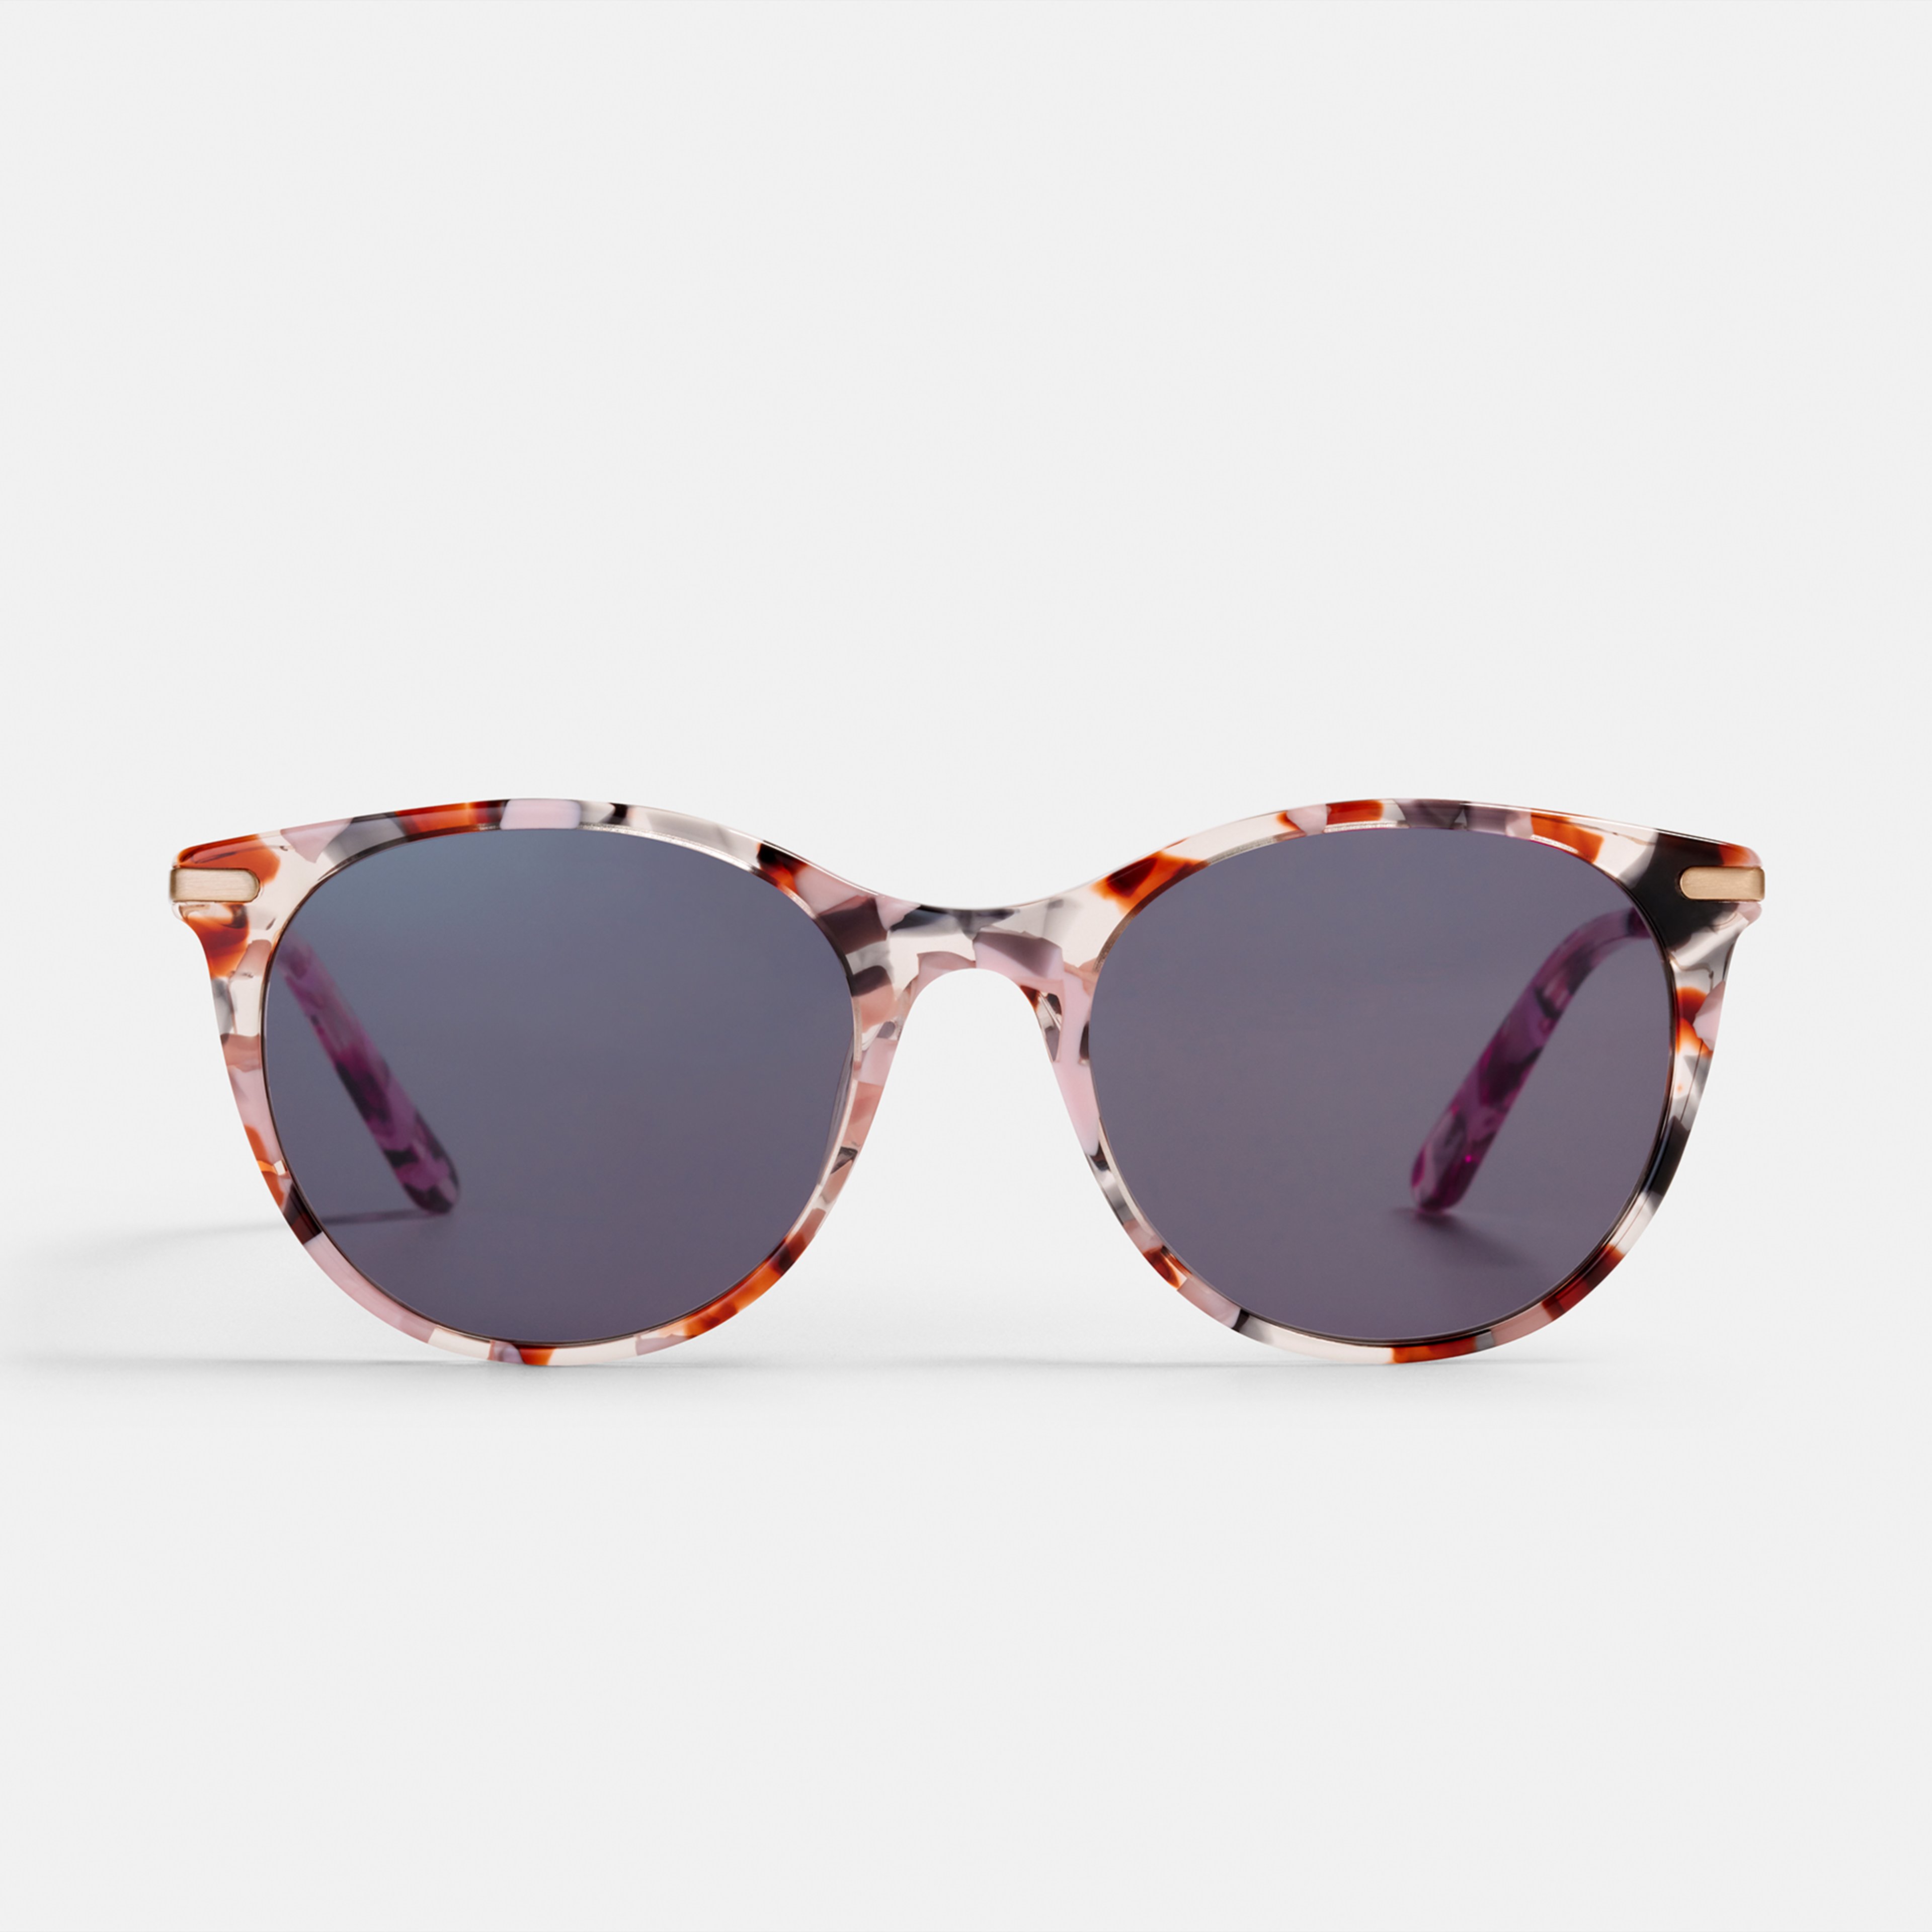 Ace & Tate Solaires | ronde combinaison in Gris, Violet, Rouge